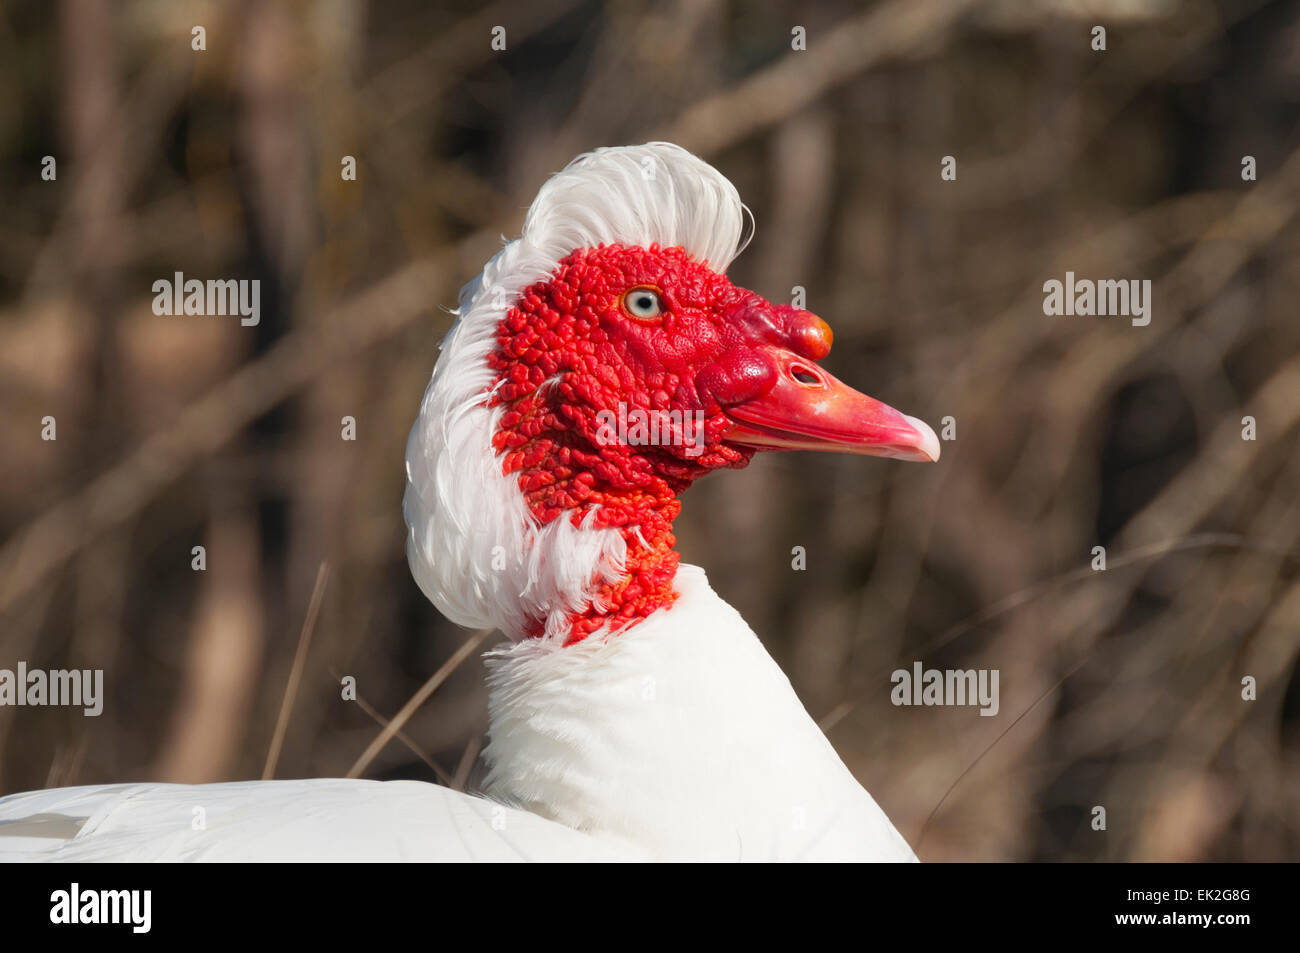 White Muscovy duck with red face head Stock Photo